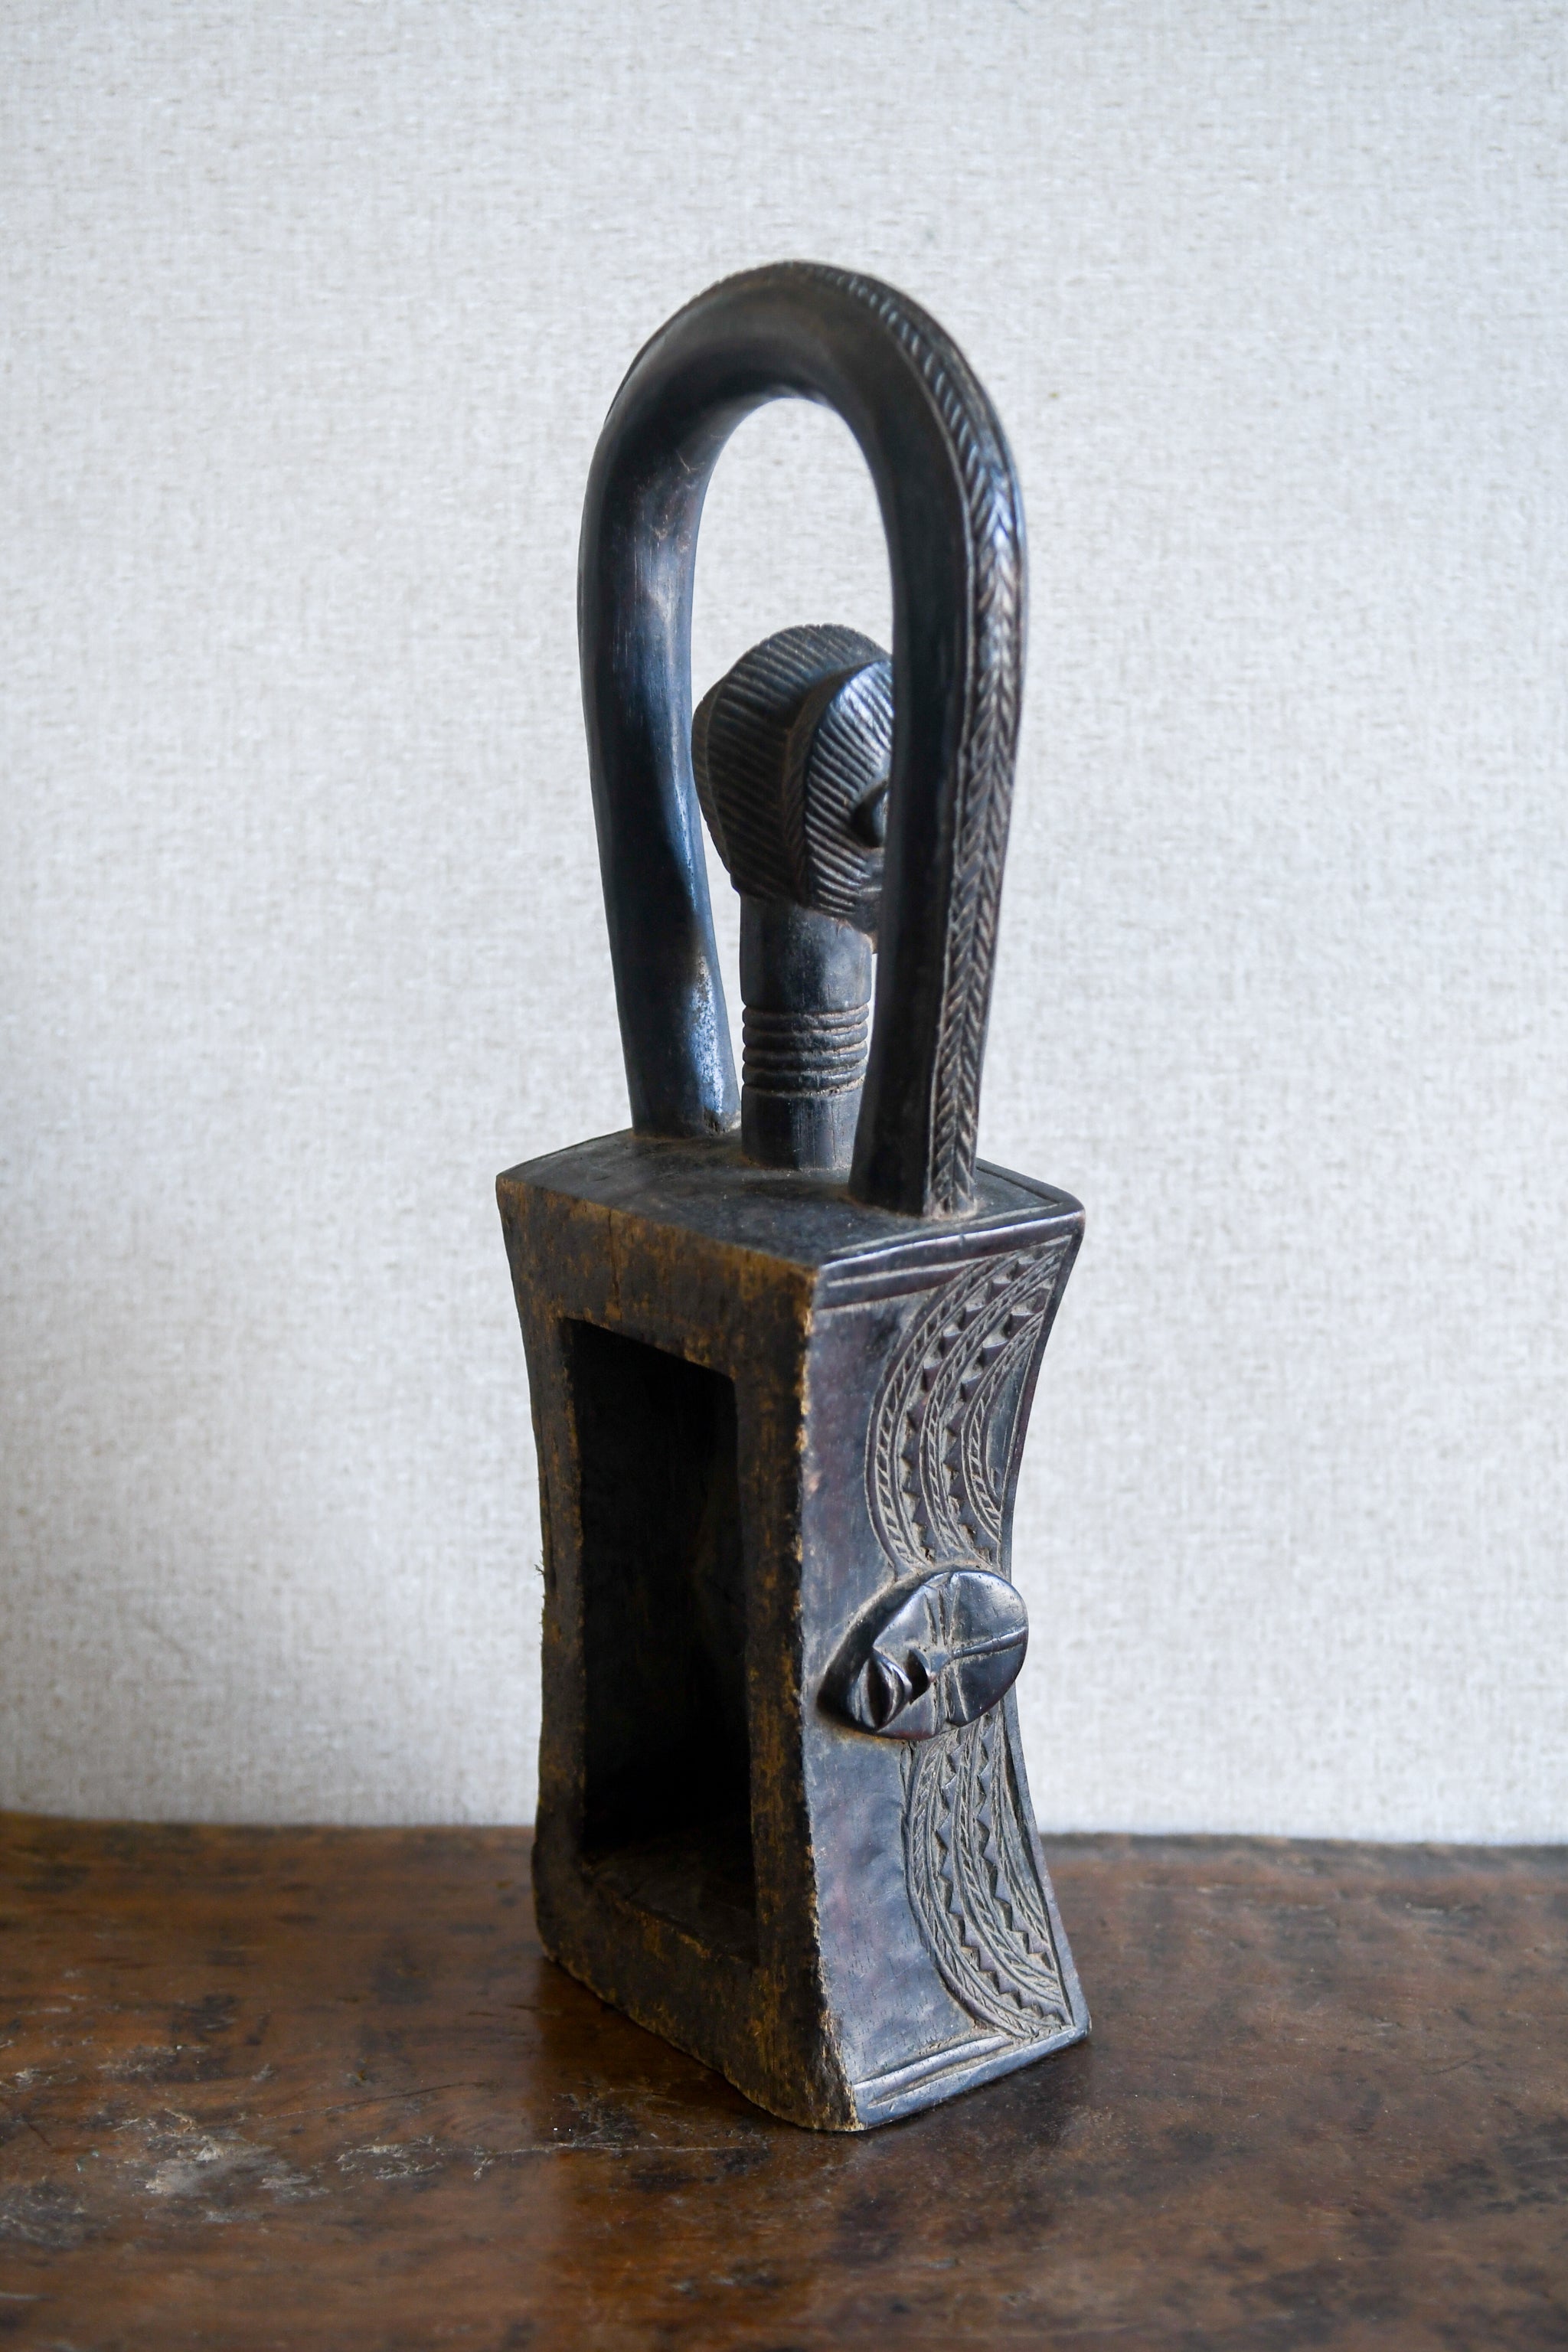 Tribal Objects - African Tribal Art - Ancient Ceremonial Art - Handcrafted Artifacts - Masks - Wood Sculptures - Iron Bronze Objects - Textiles - Art Pieces - African Folk Art - This Dan Figure Headrest Masks Sculpture makes a unique addition to any collection. Carved from carved wooden tribal objects, it features precise details that make it a truly captivating piece. Perfect for displaying in any home or office, this collectible sculpture adds a touch of African cultural heritage to any space.